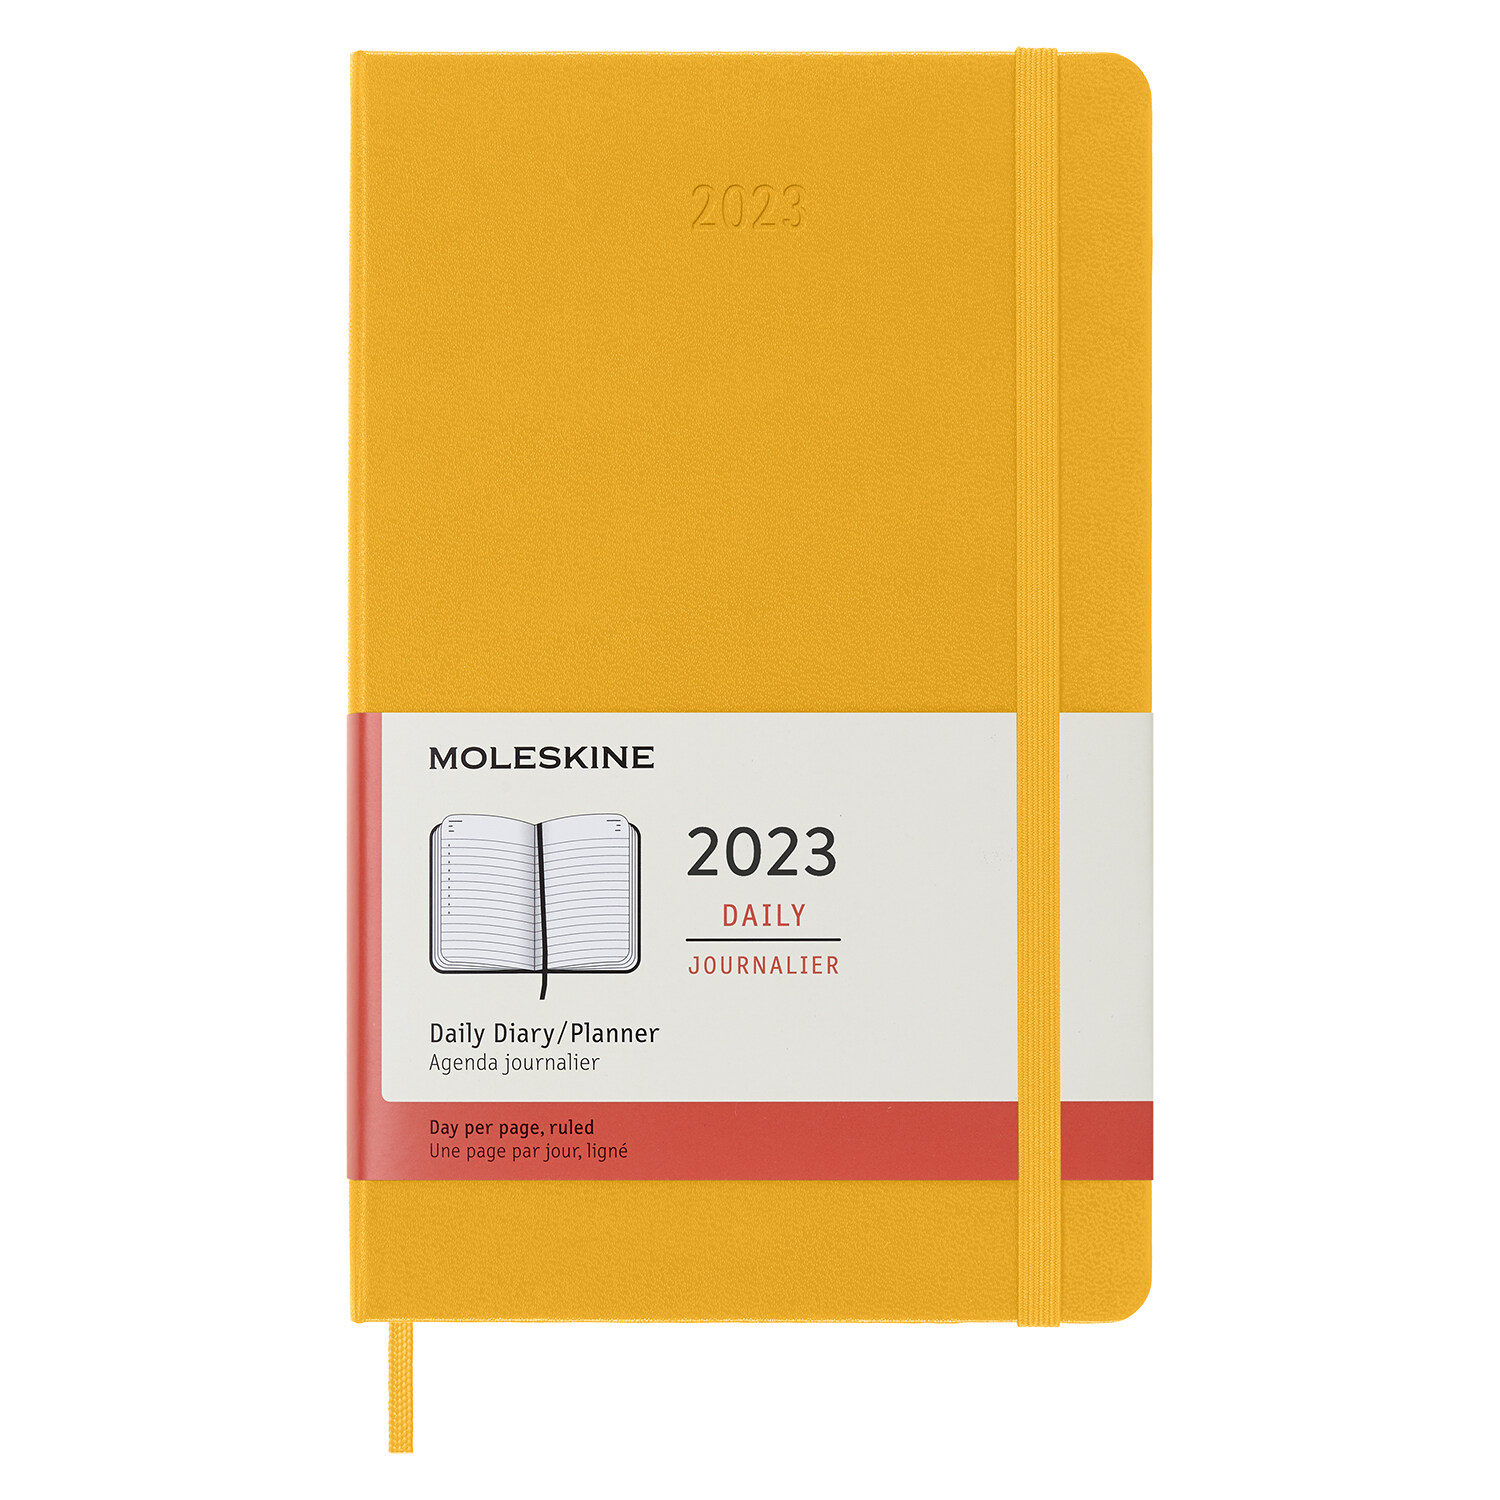 Moleskine 2023 Daily Planner, 12m, Large, Orange Yellow, Hard Cover (5 X 8.25) (Other)